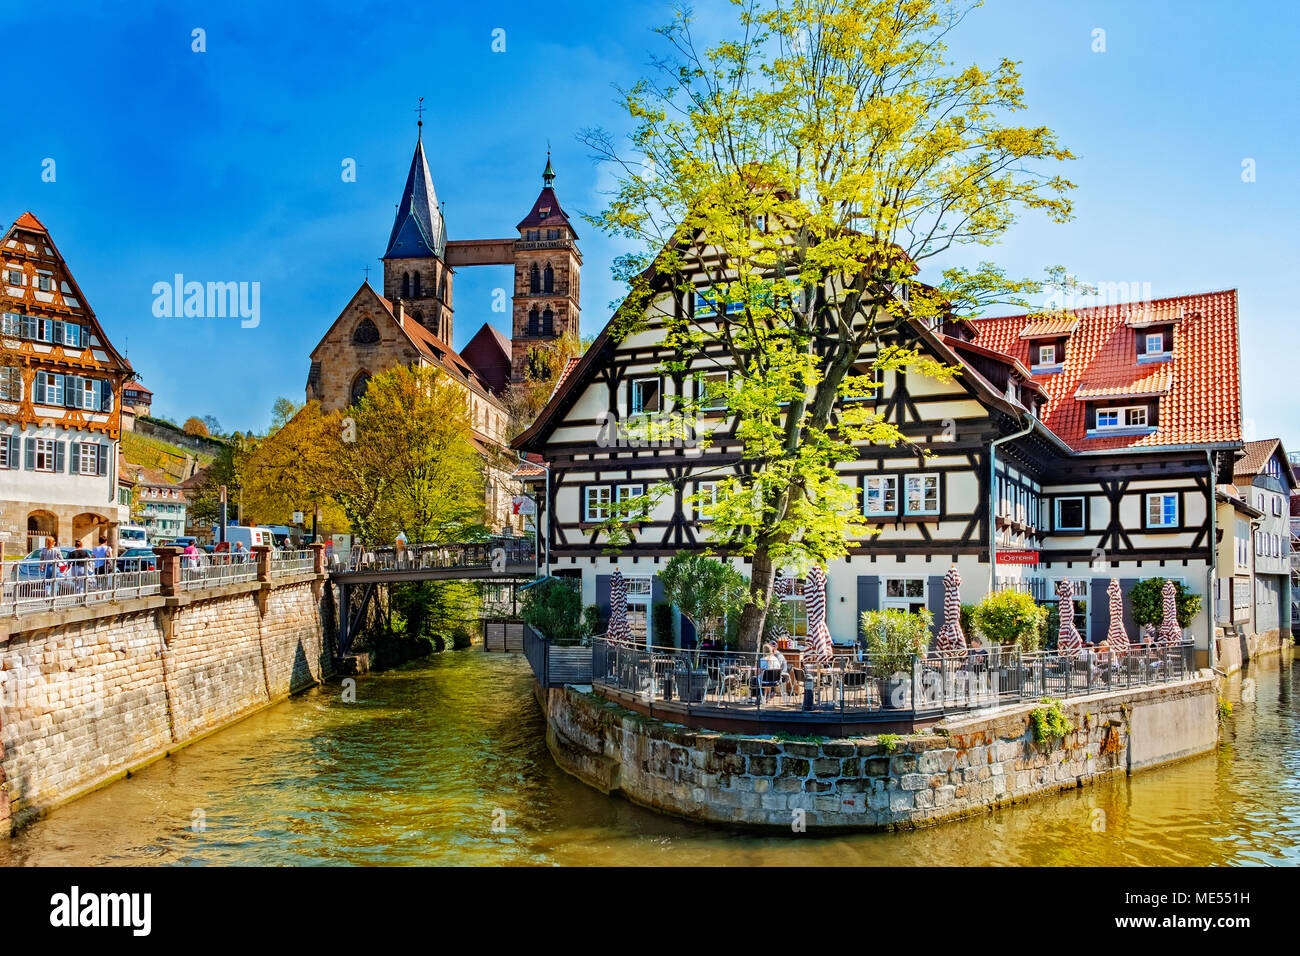 ESSLINGEN, GERMANY - APRIL 17, 2018: The photo shows the old quarter of Esslingen with the old building Alte Zimmerei surrounded by the Neckar river i Stock Photo